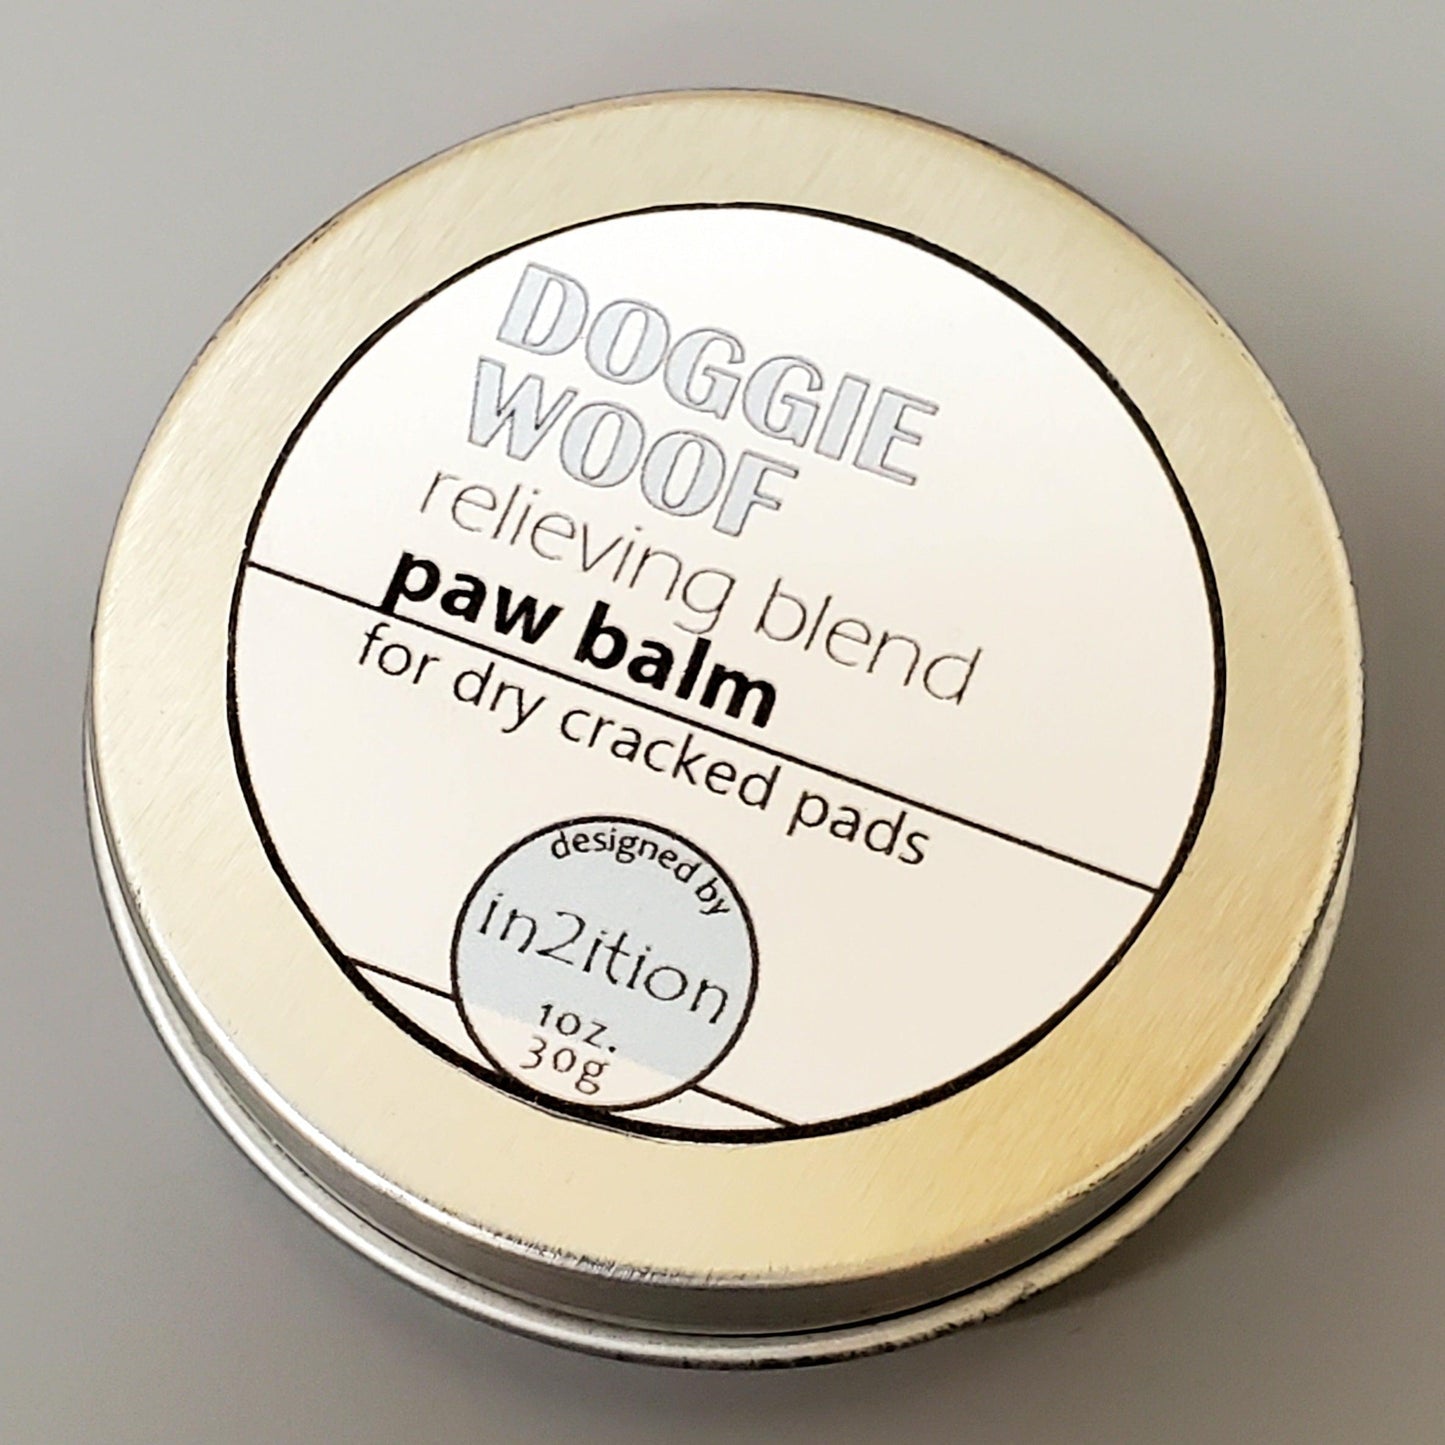 Doggie Paw Balm-Pets-in2ition mercantile